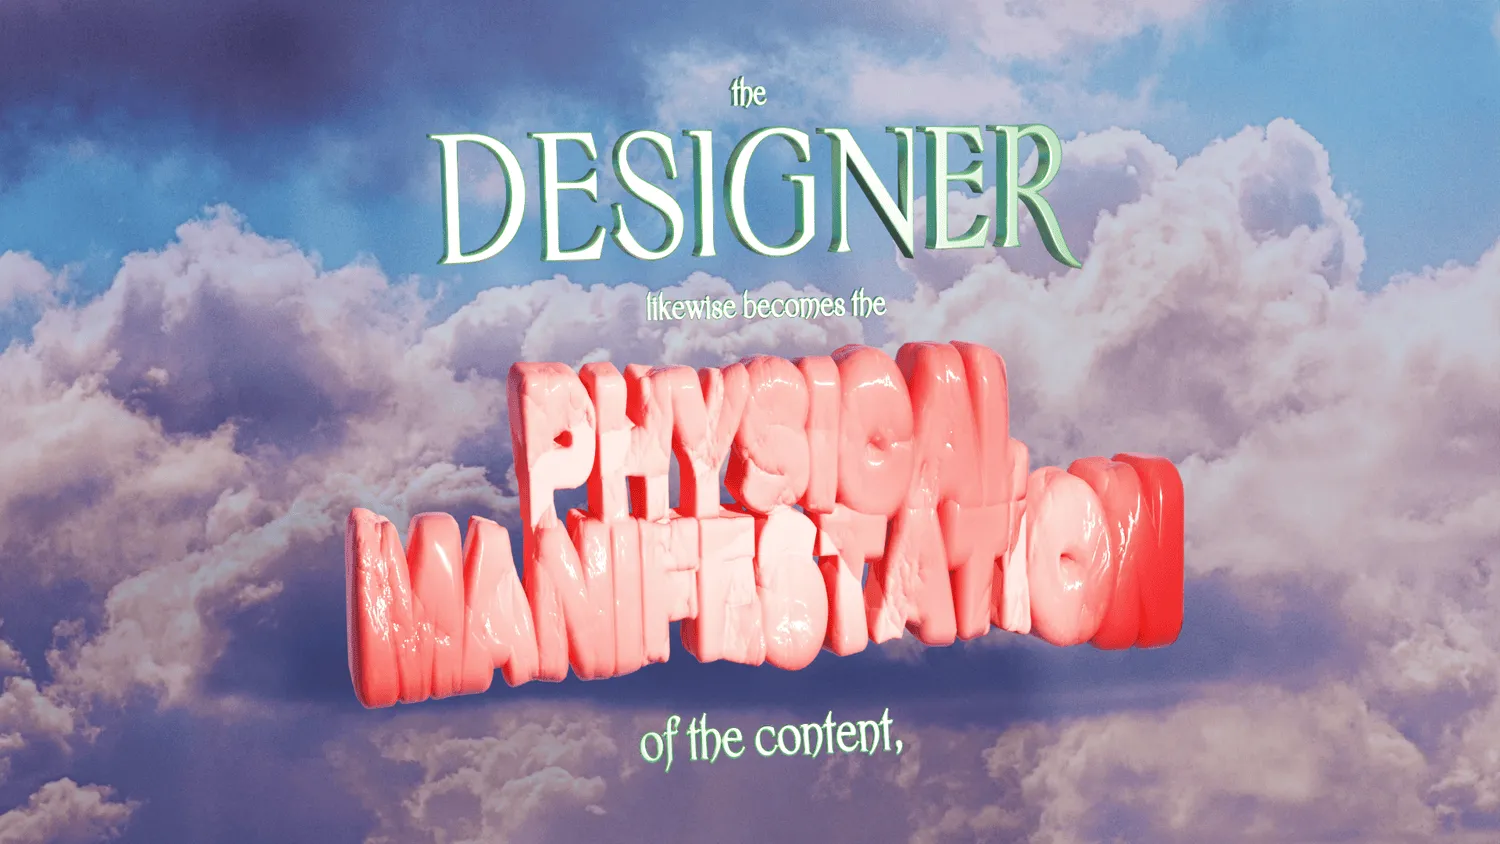 The designer likewise becomes the physical manifestation of the content